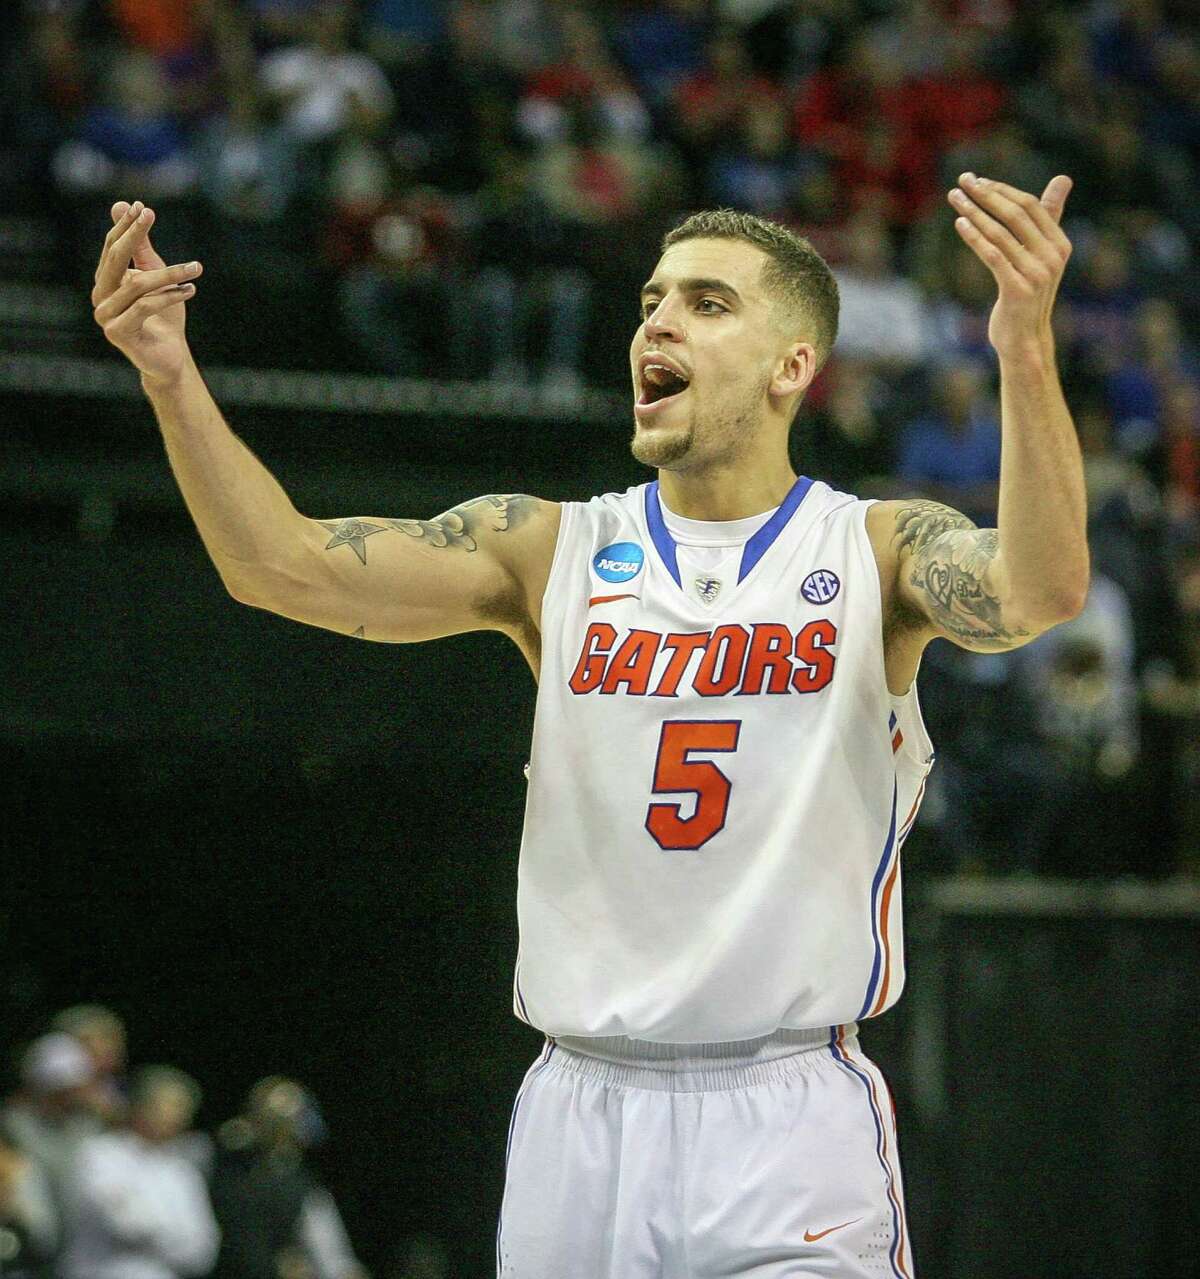 Florida's Scottie Wilbekin enjoys the moment as the clock winds down on the Gators' win over Dayton.